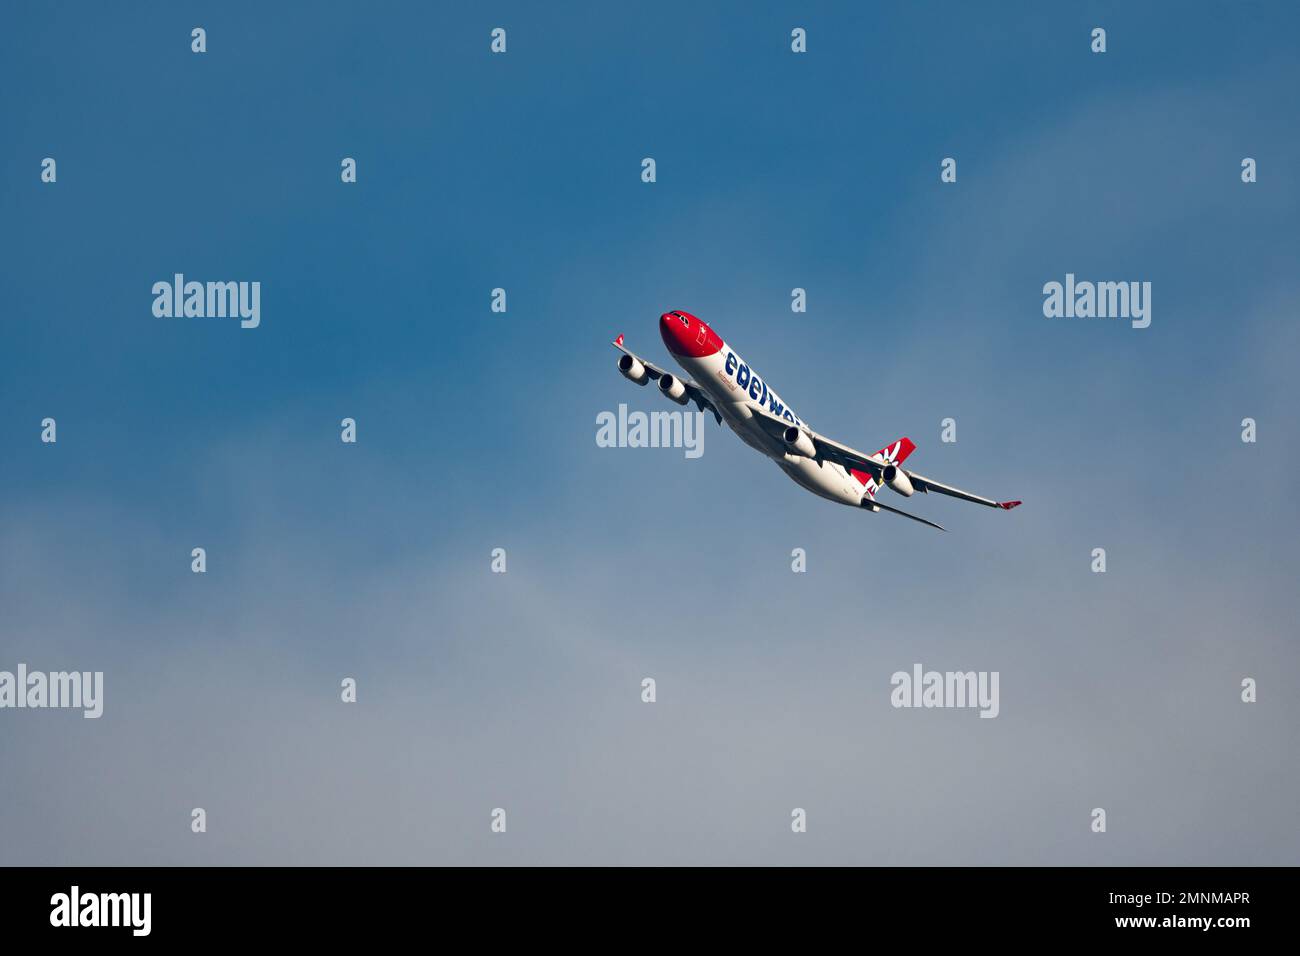 Zurich, Switzerland, January 19, 2023 Edelweiss Airbus A340-313X overhead in the blue sky Stock Photo